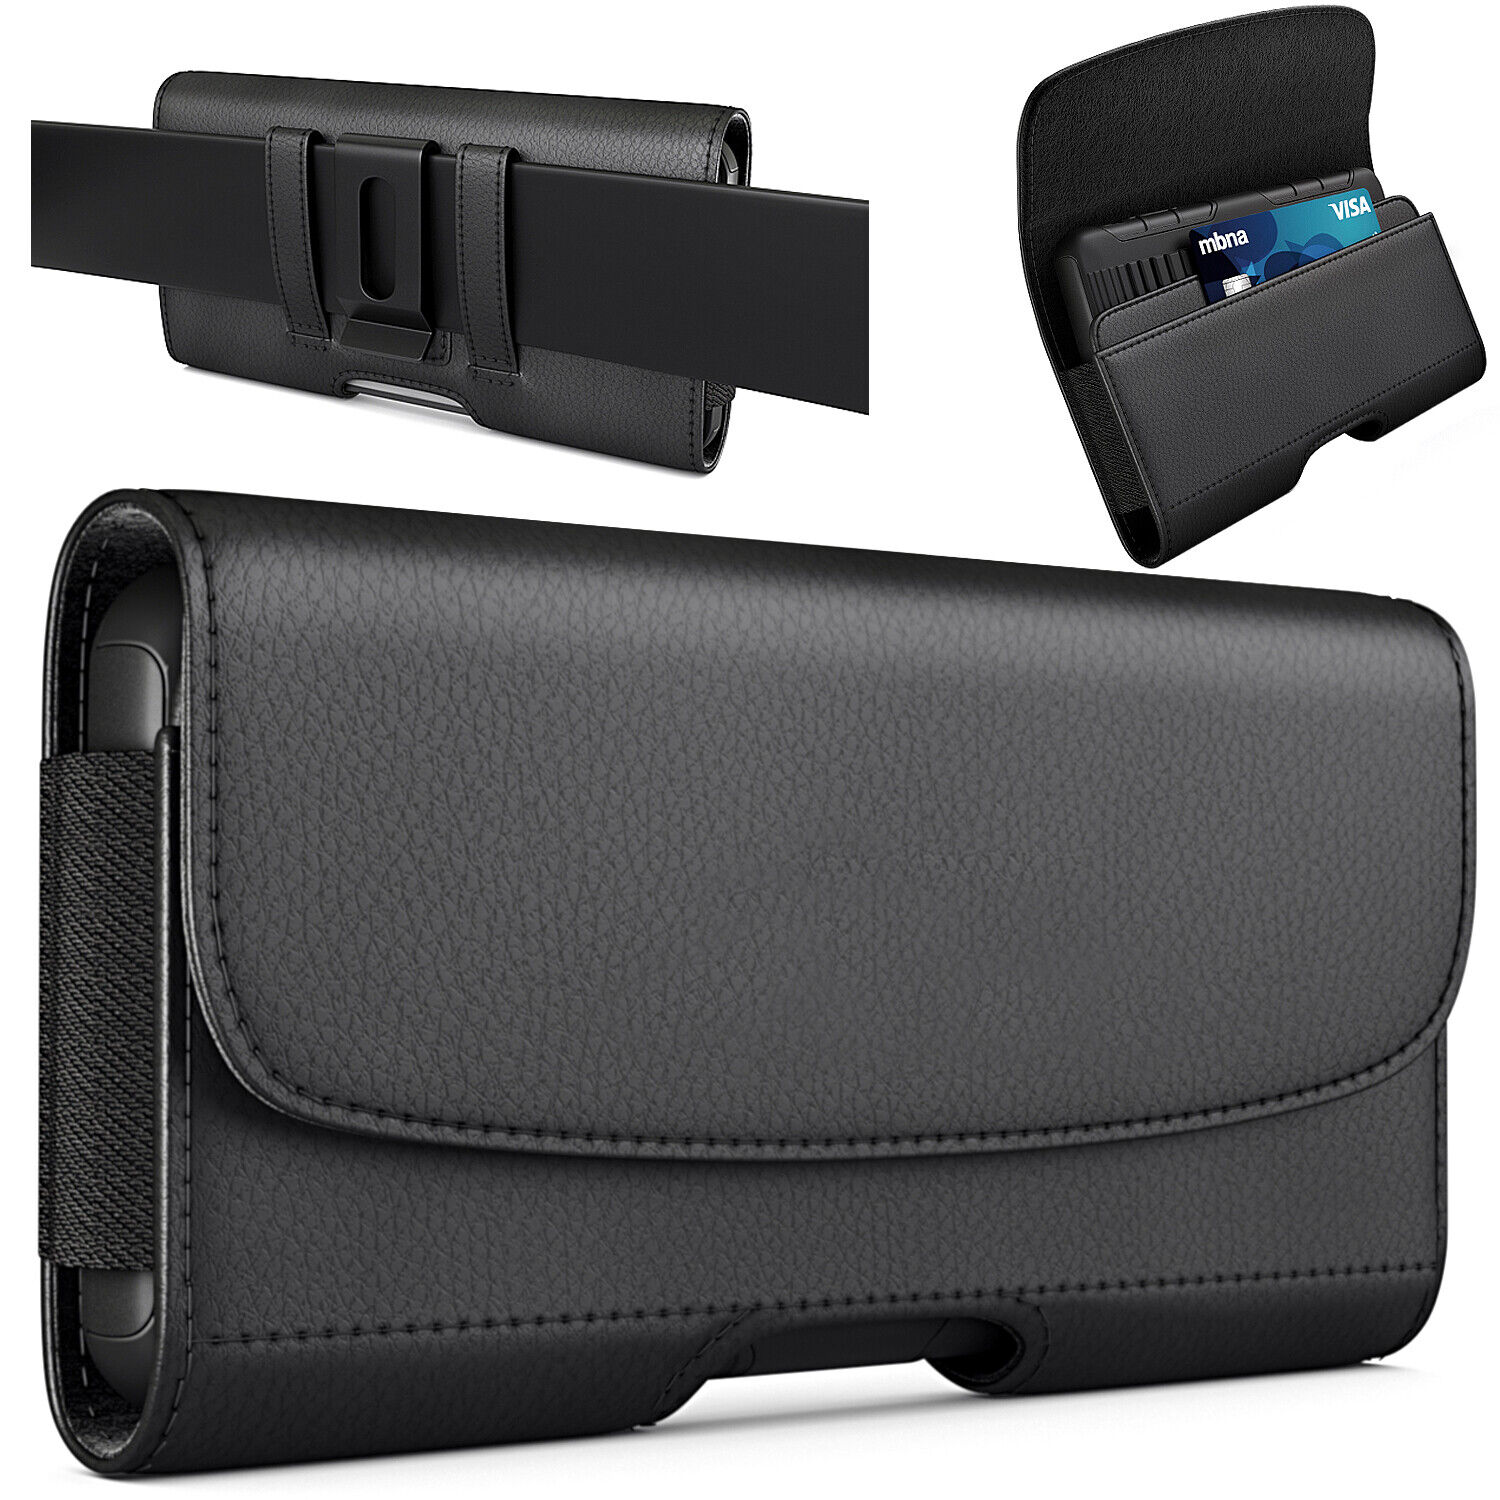 Cell Phone Holster Belt Clip Pouch Cover For Samsung Galaxy J7/ J7v/ J7 Prime